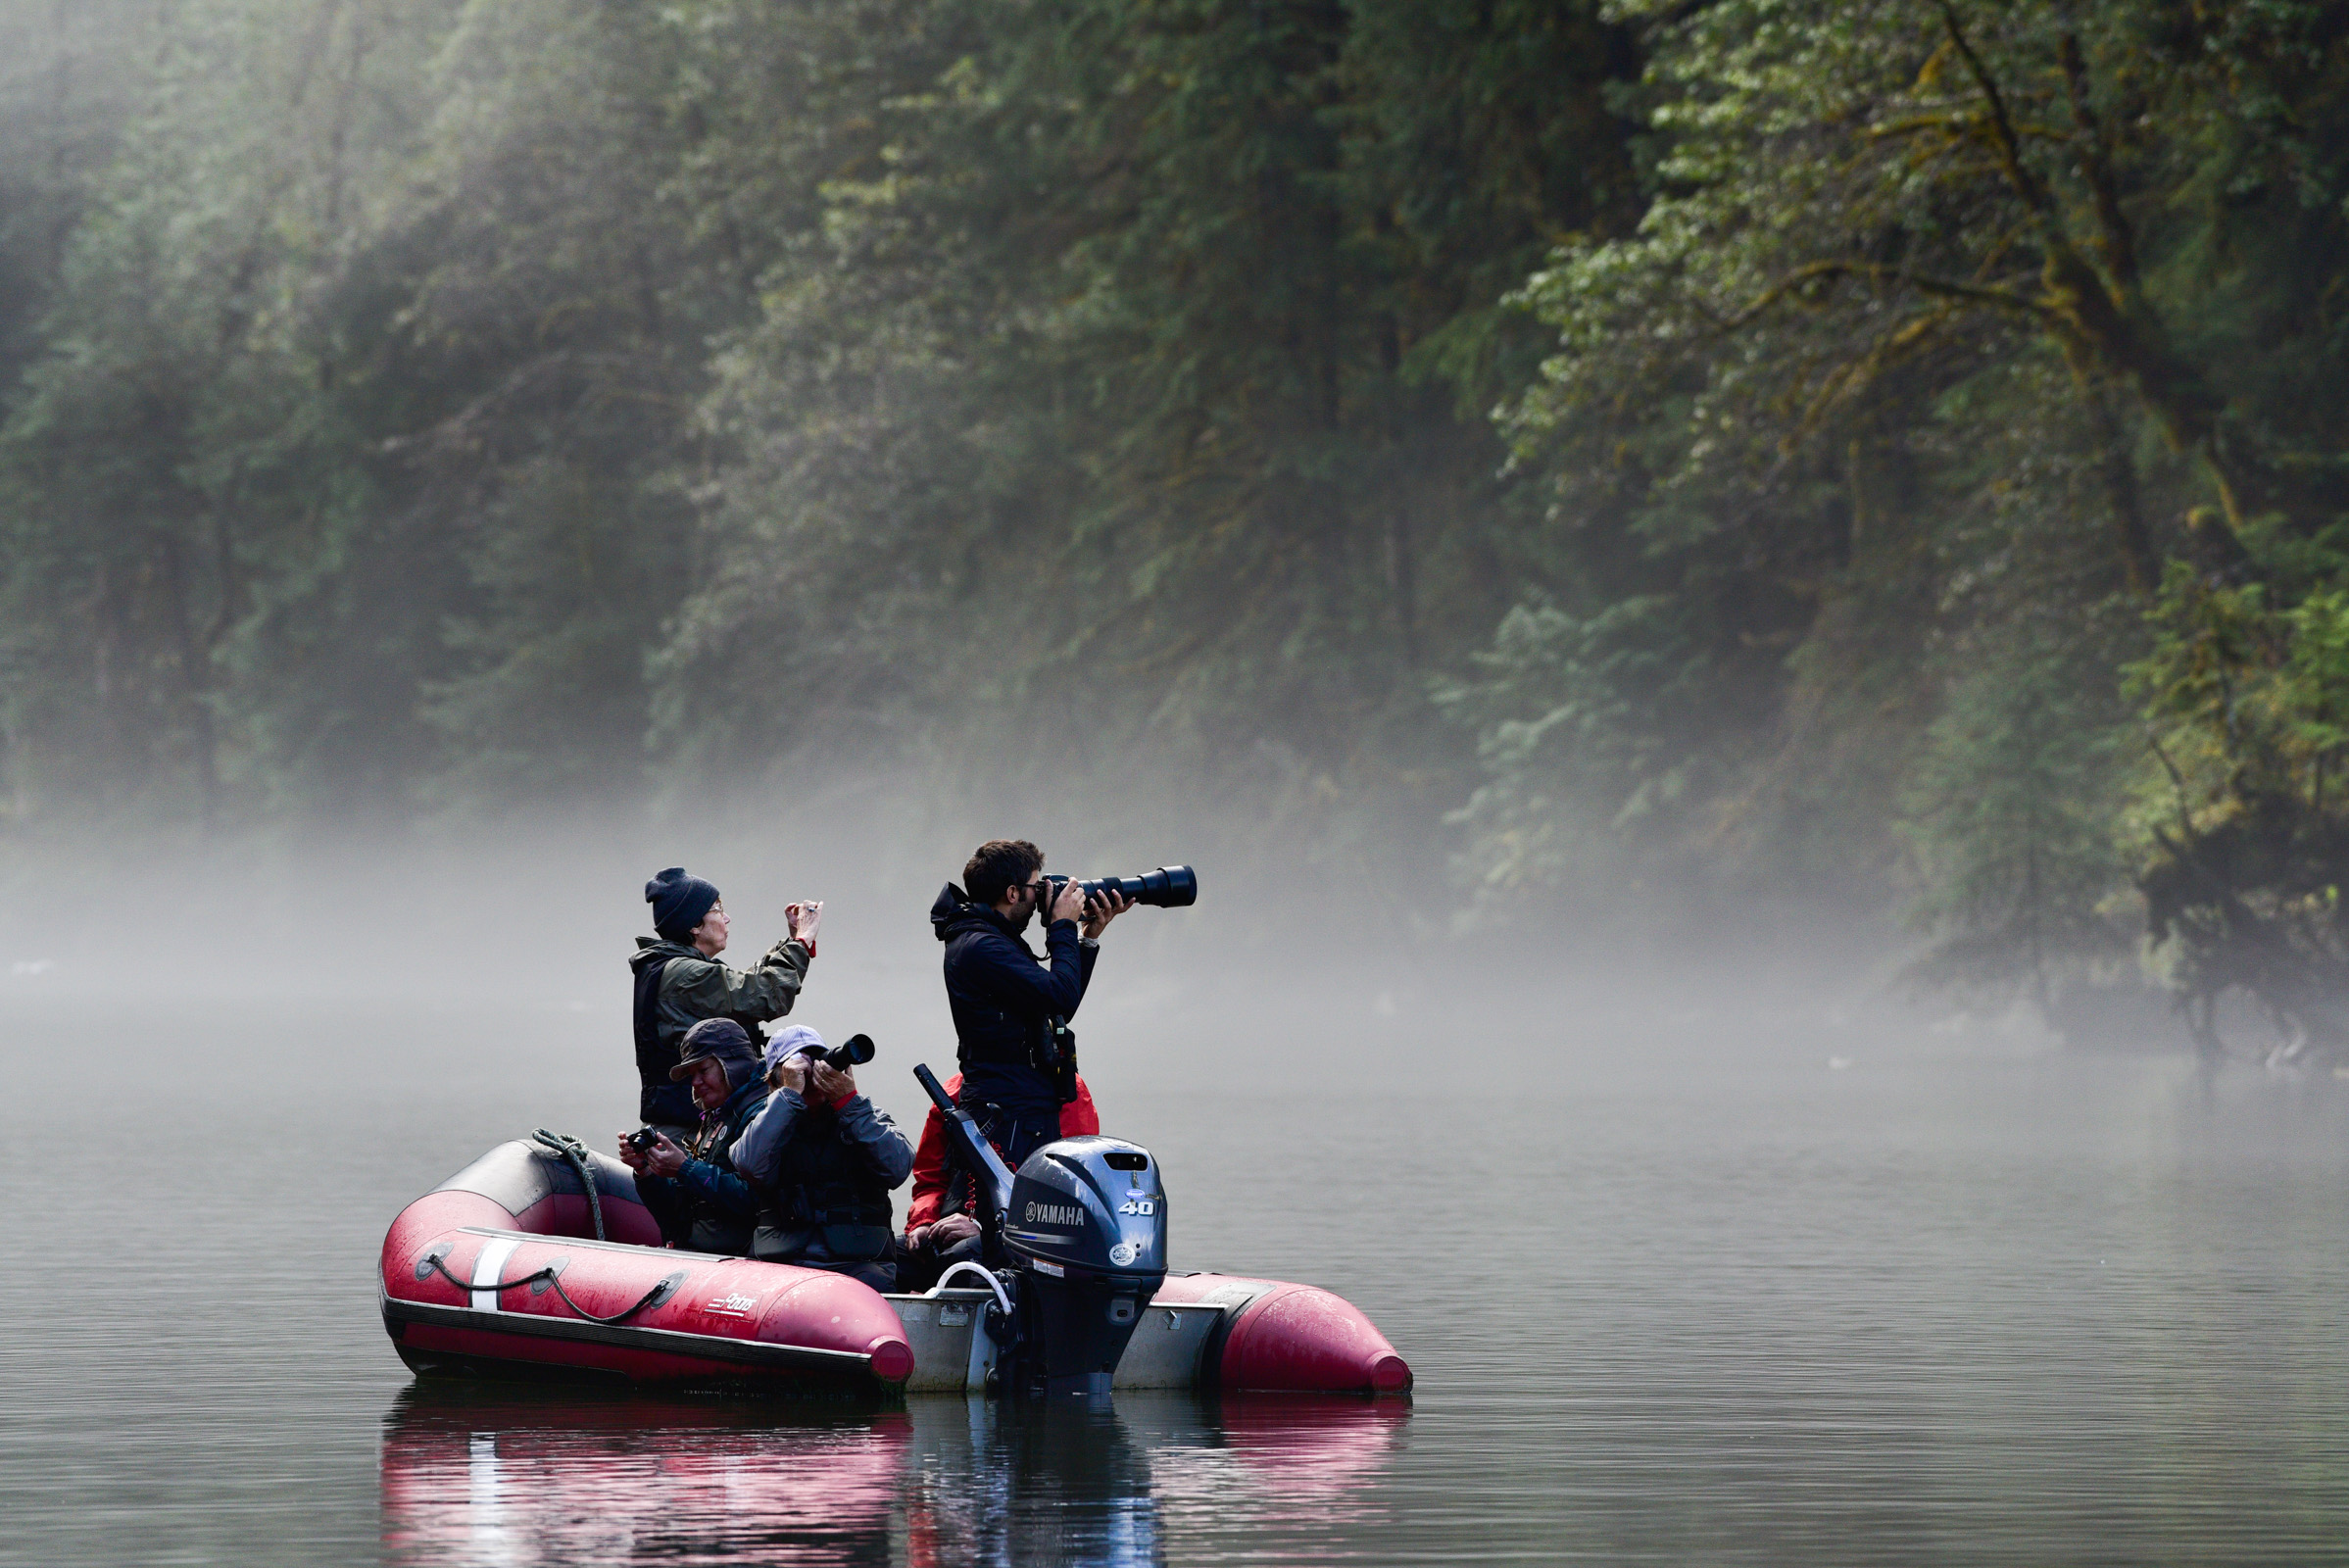 Photographing the scene in a tranquil tidal river channel in the Great Bear Rainforest.